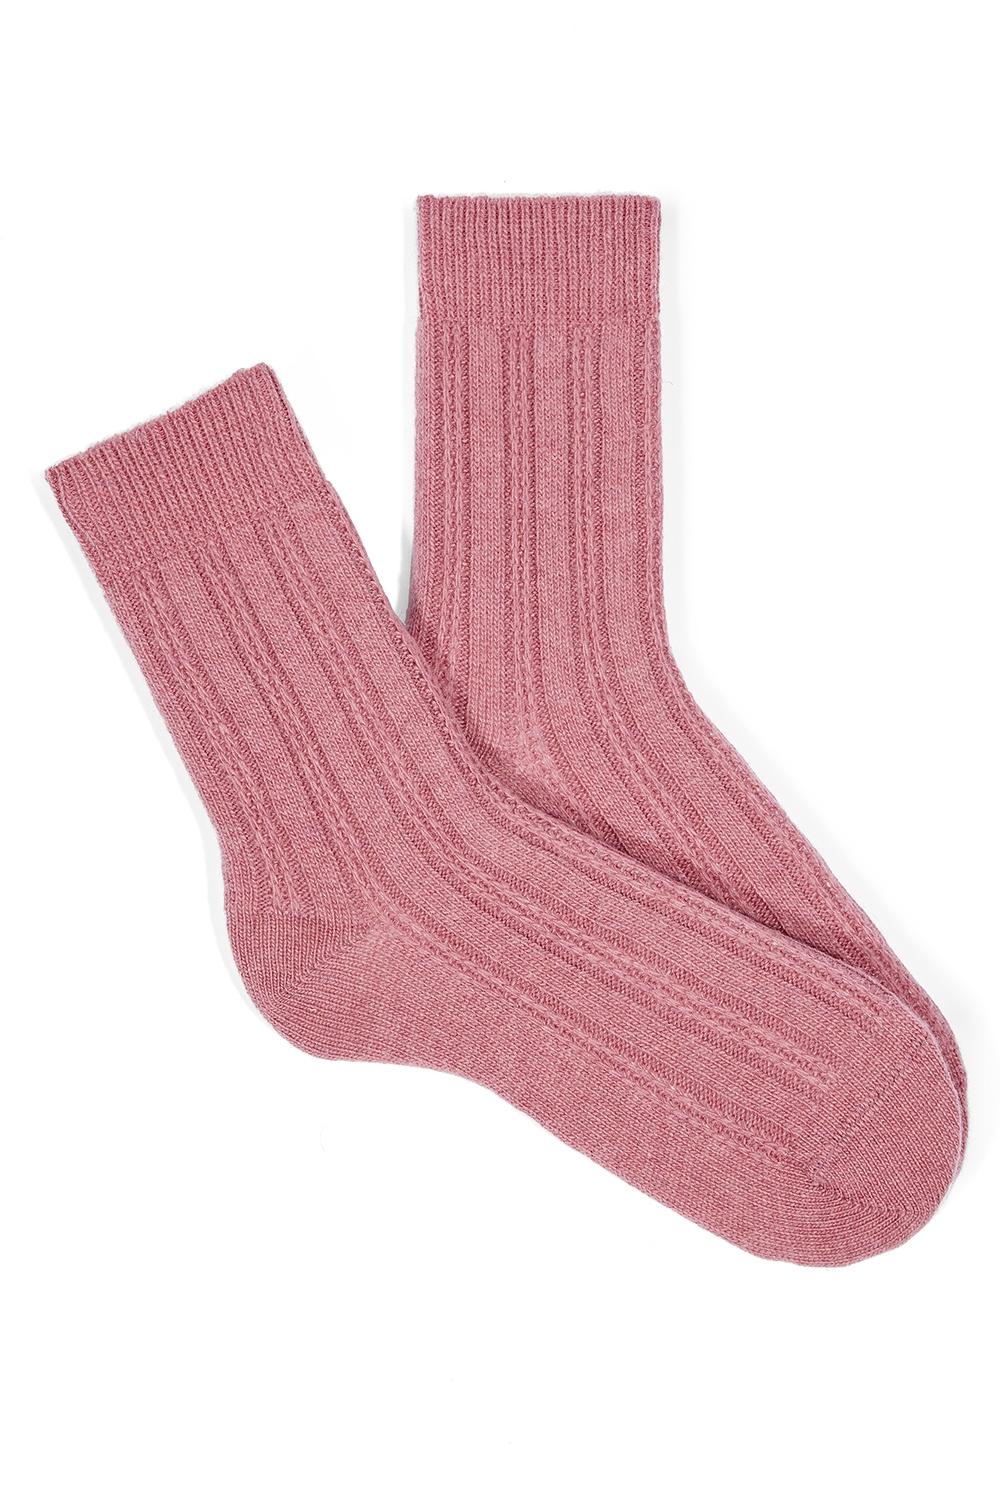 Calcetines Lana Cashmere para Mujer